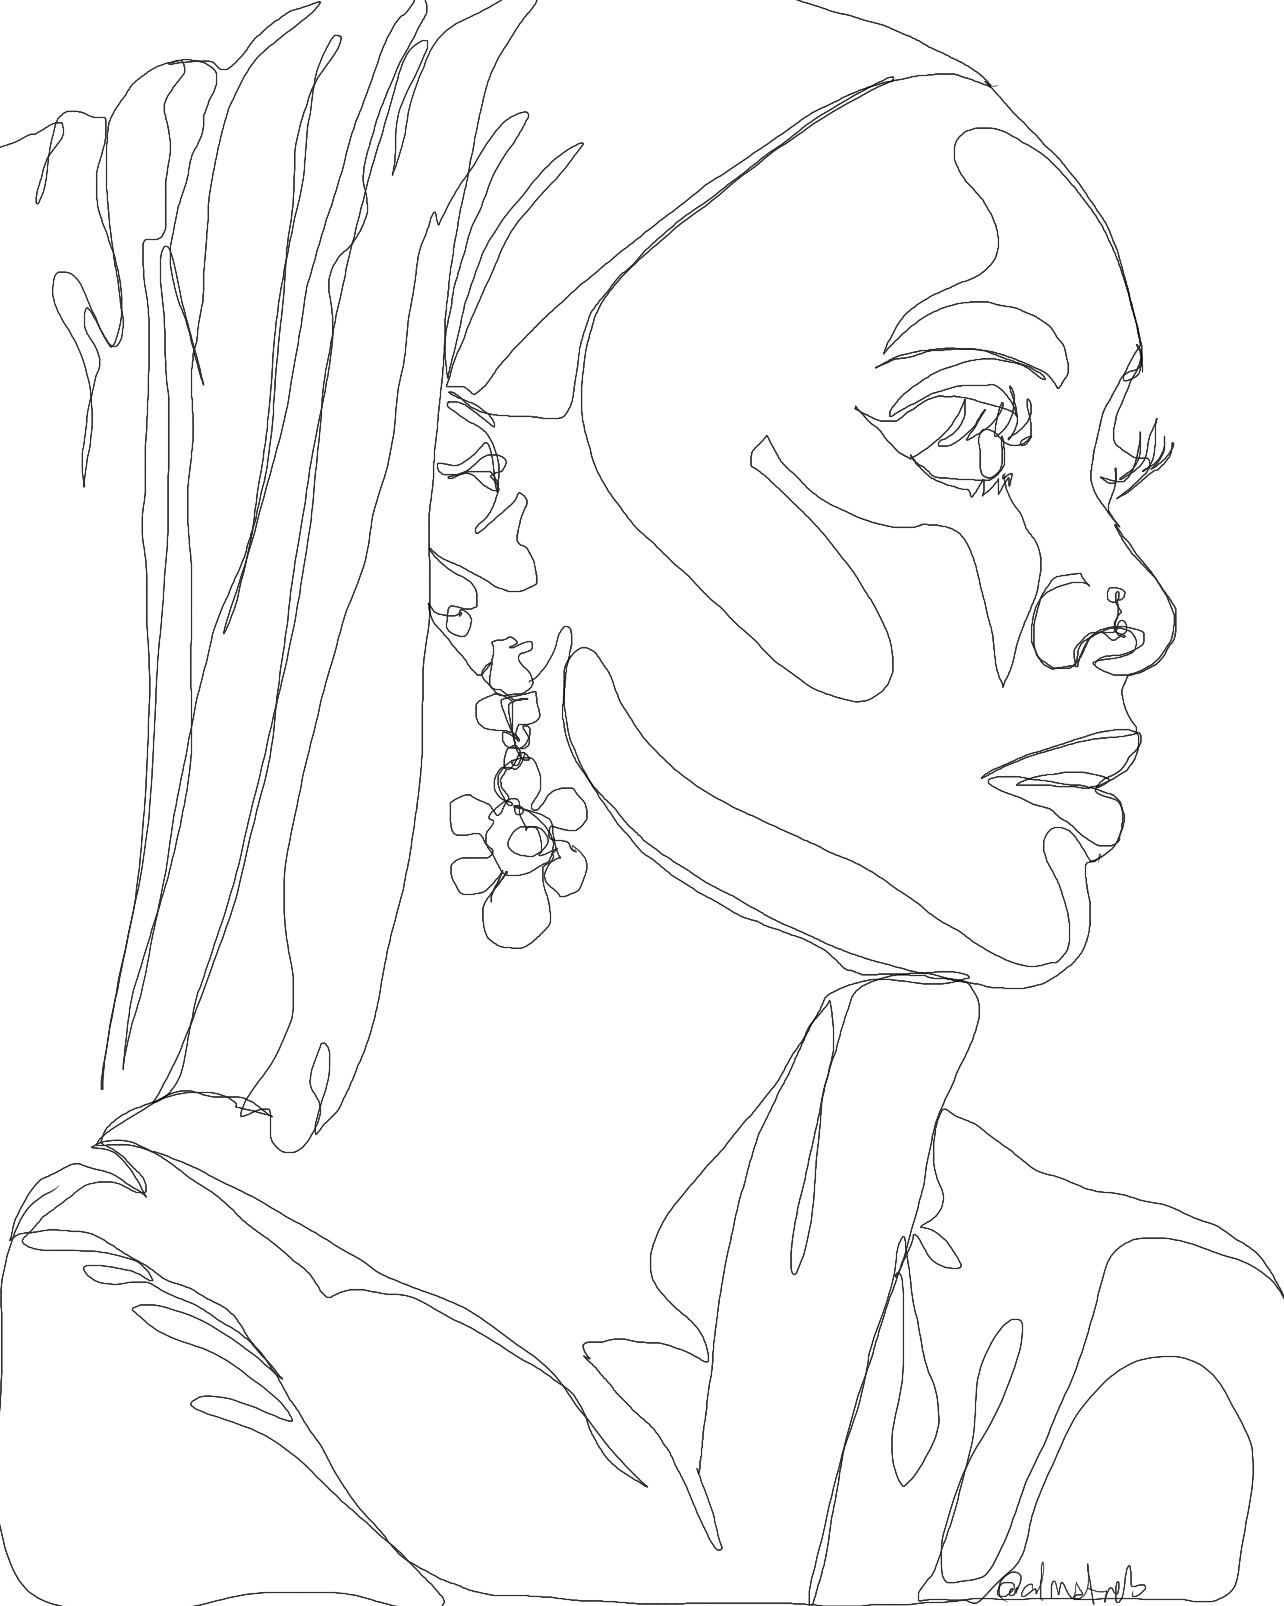 My line art - Woman and scarf.PNG